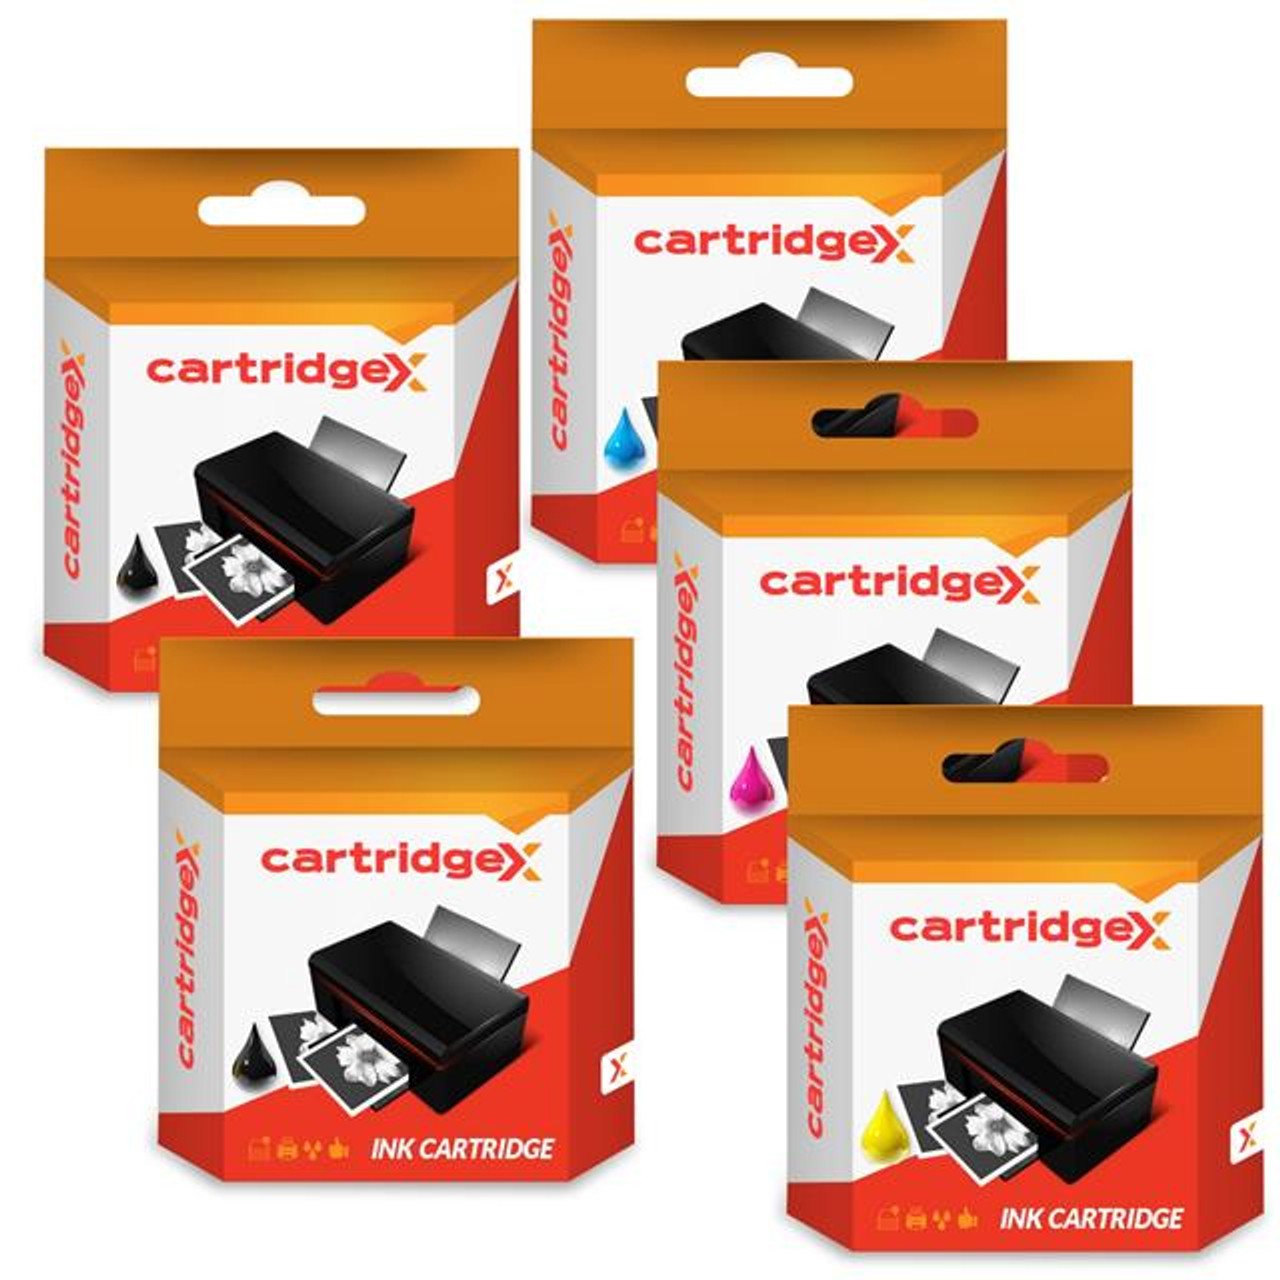 Compatible Set Of 5 Ink Cartridges For Pgi-525 & Cli-526 Canon Pixma Mg5320 Mg5350 Mg6150